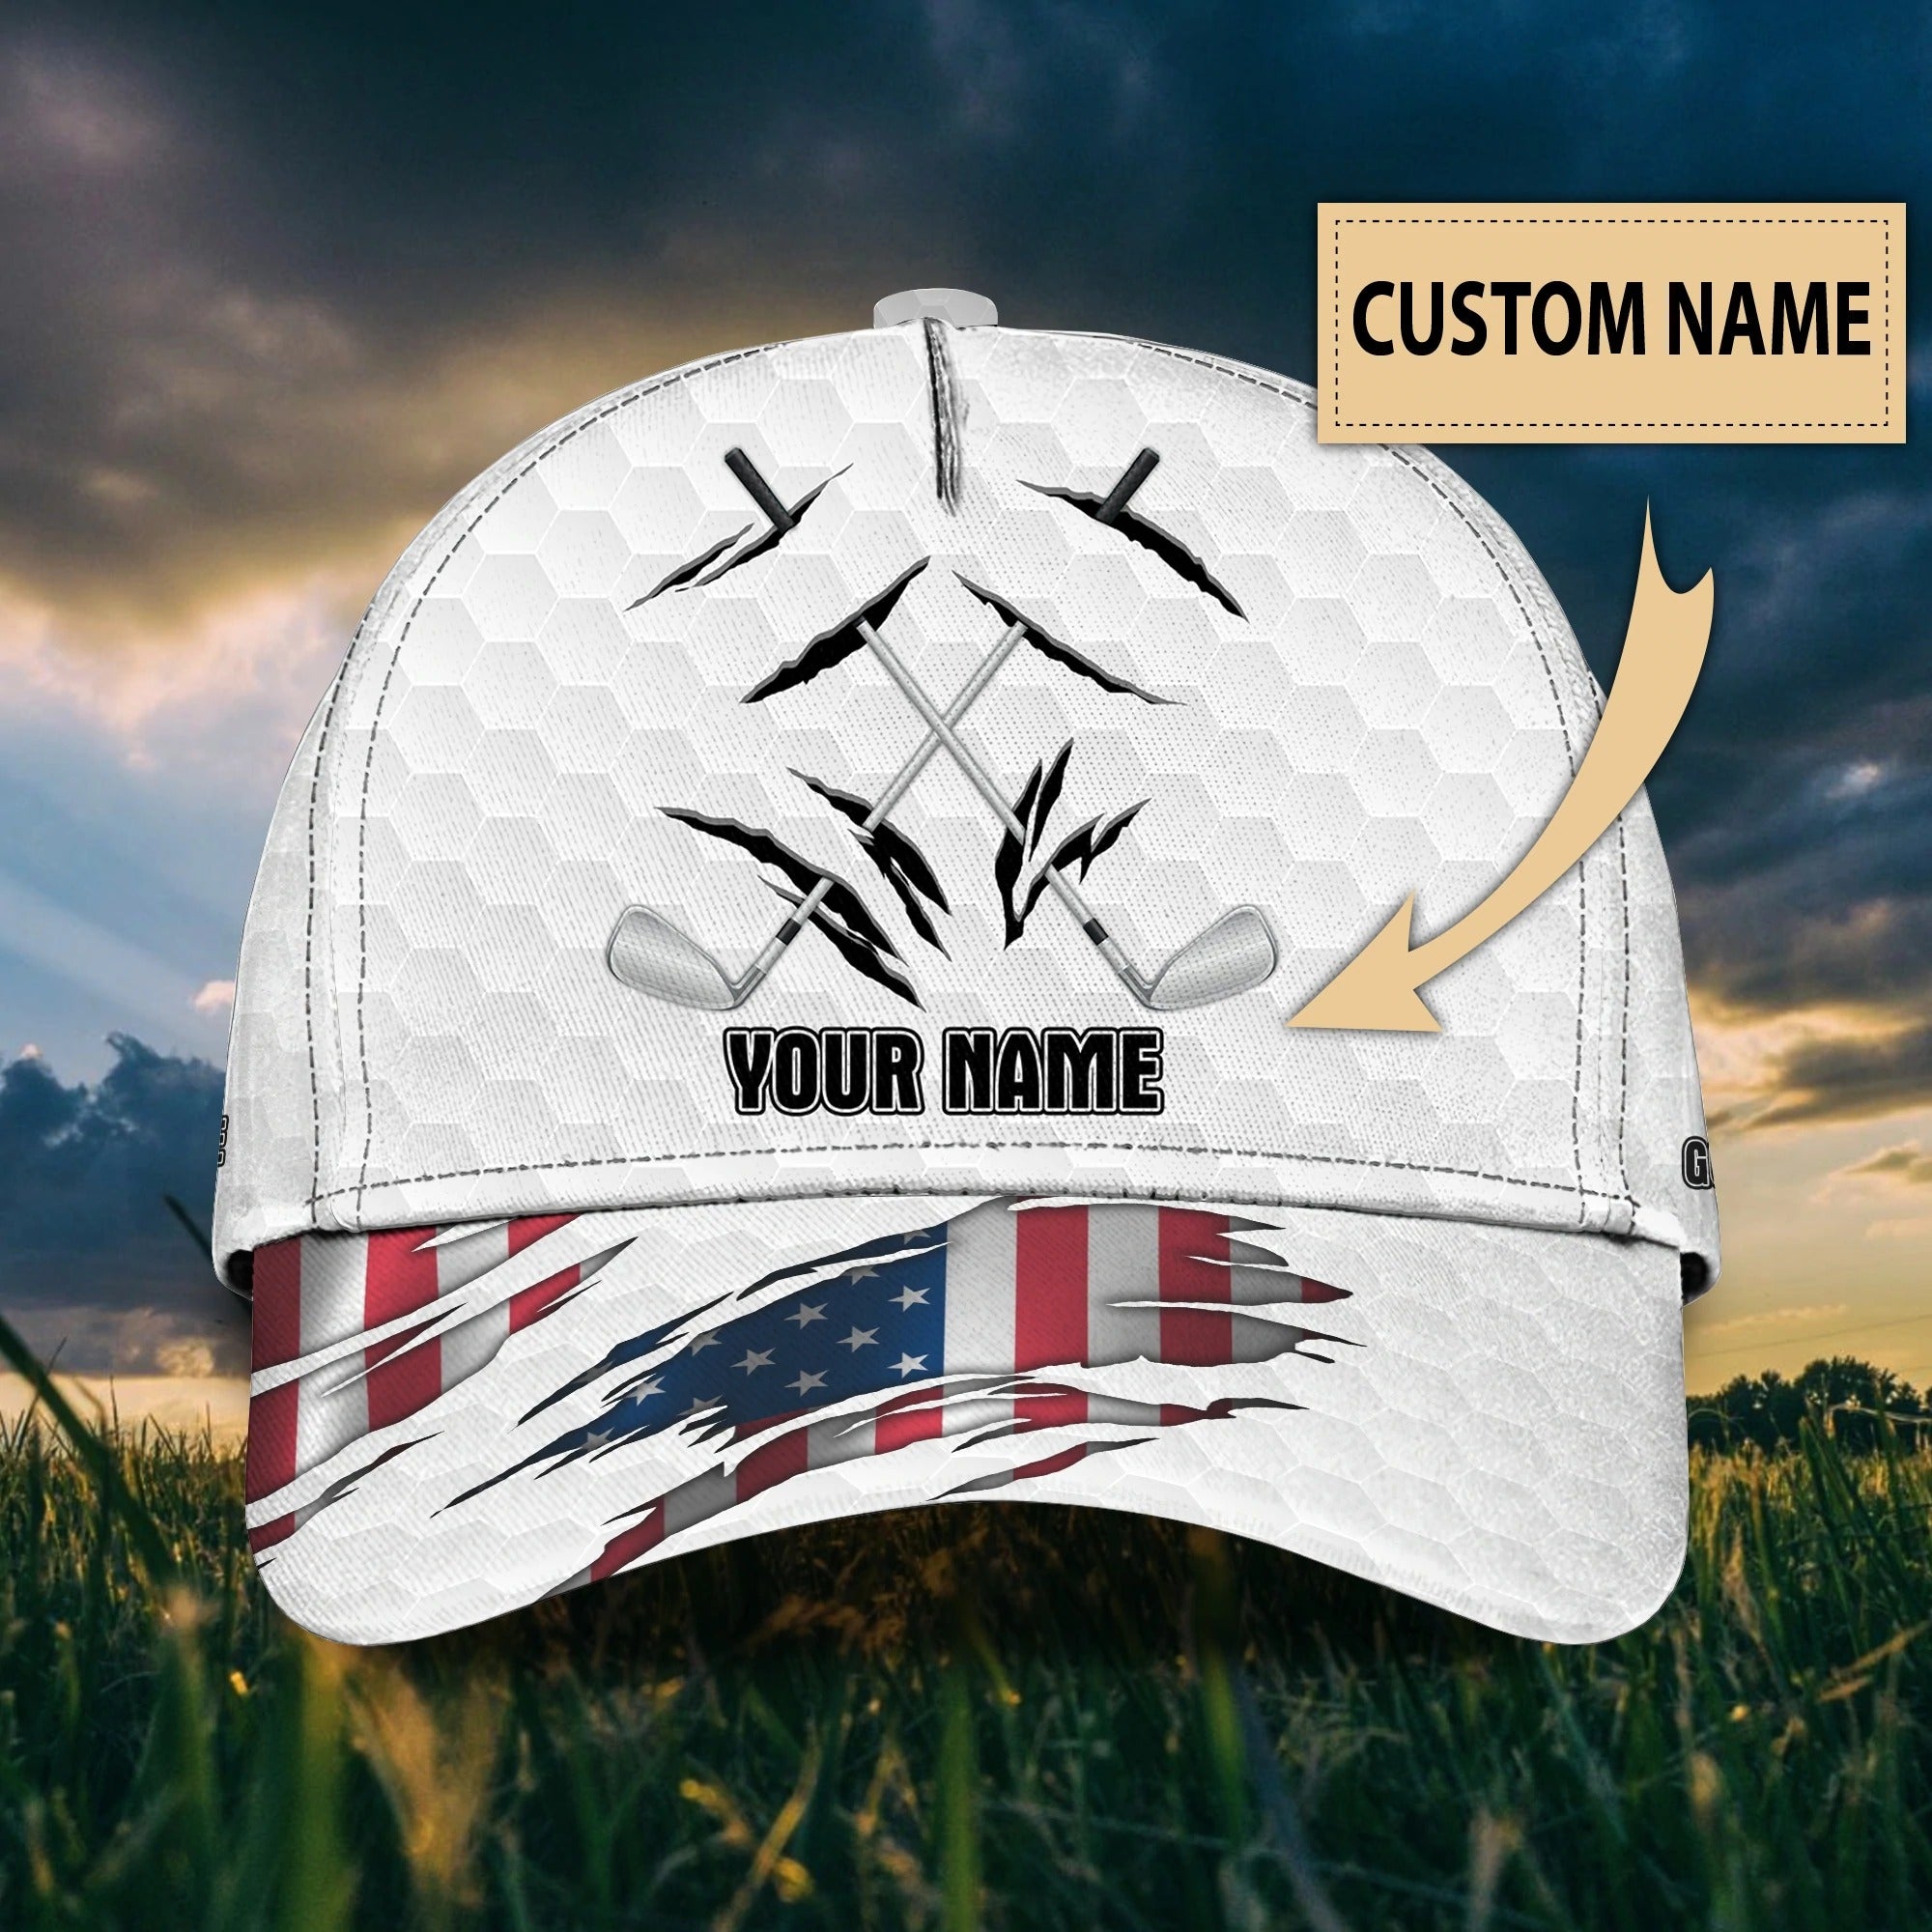 Personalized With Name Golf Cap For Men And Woman/ Golf Baseball Cap Gift To Golfer/ Birthday Golfer Presents